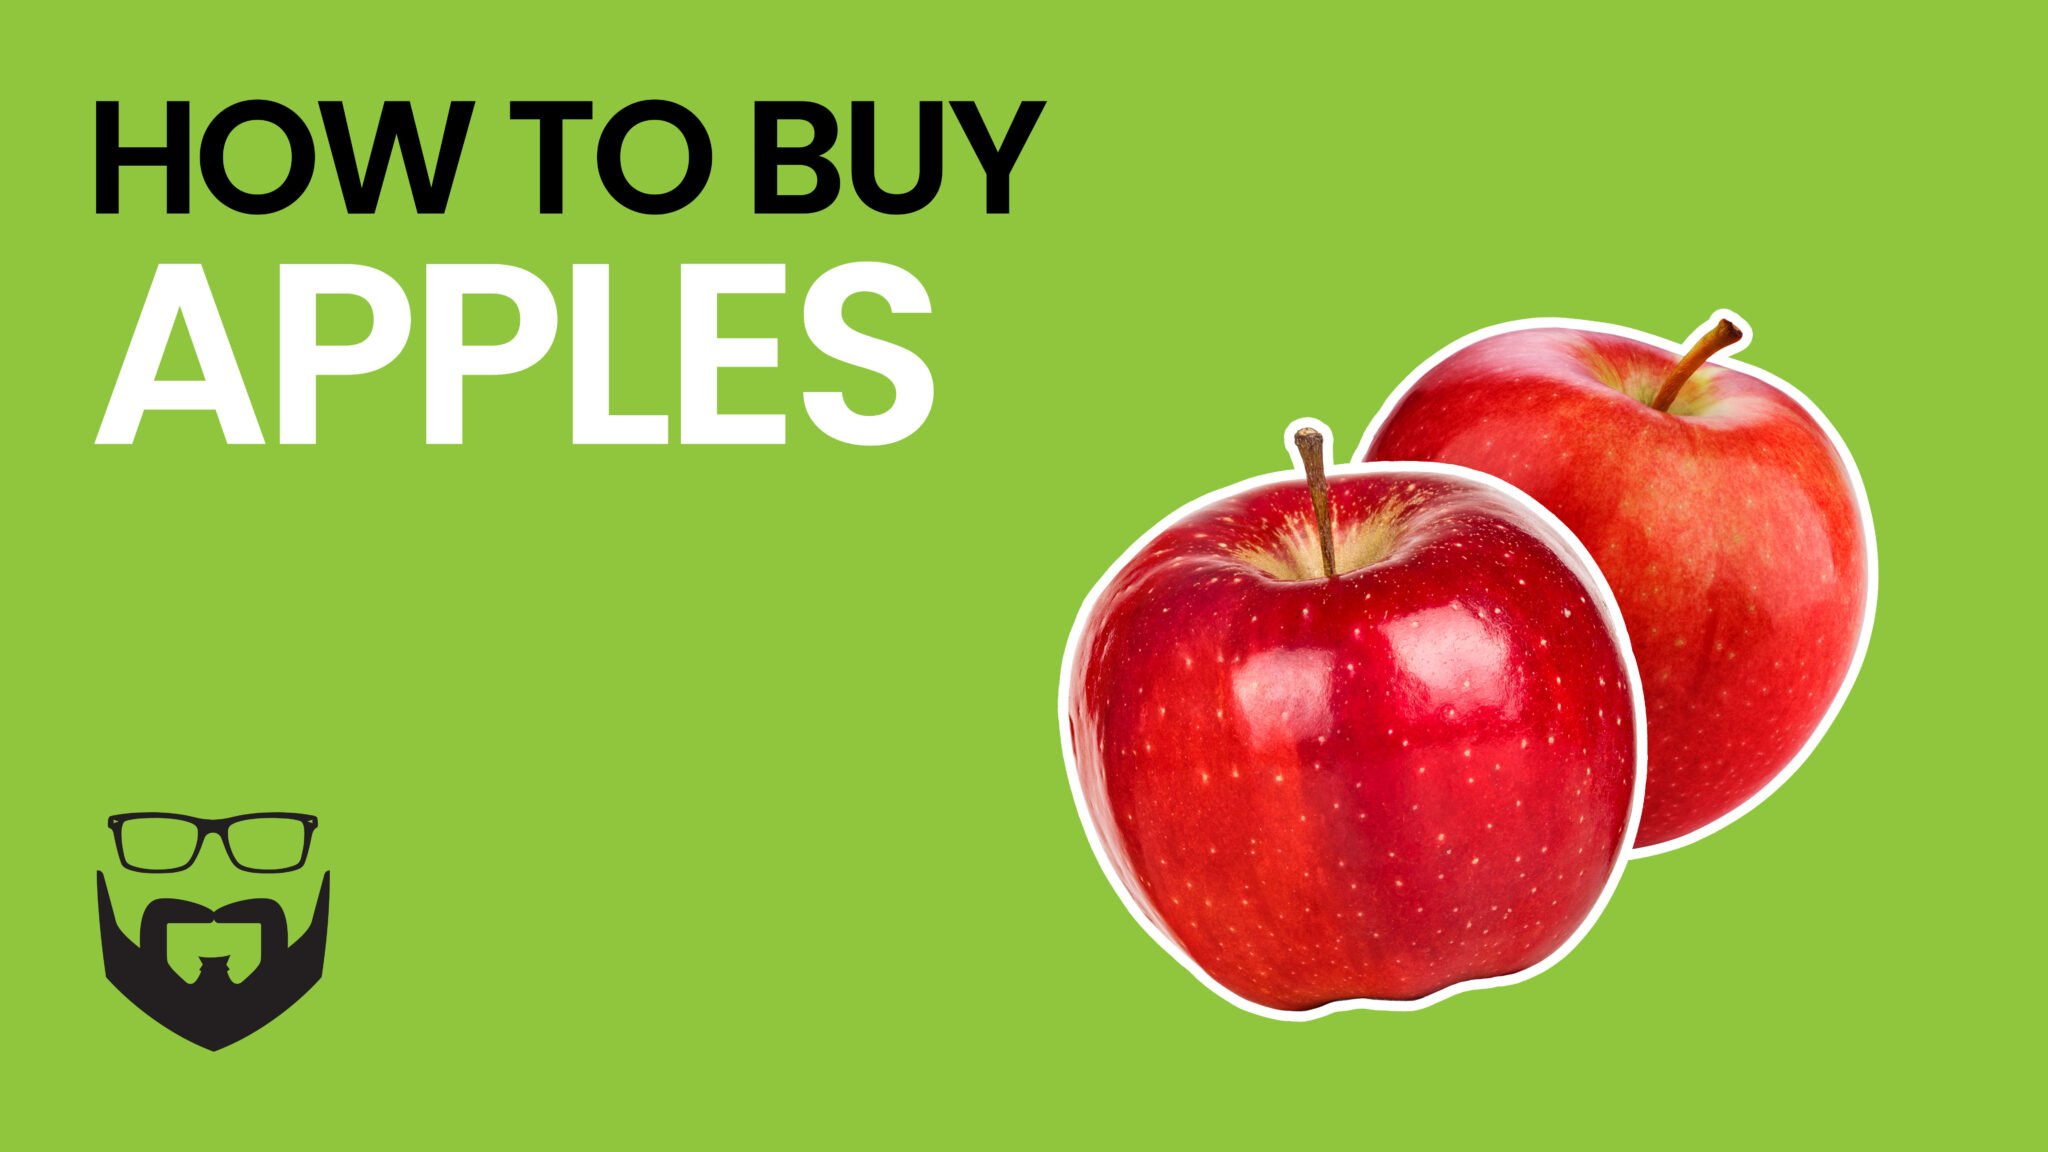 How to Buy Apples Video - Green